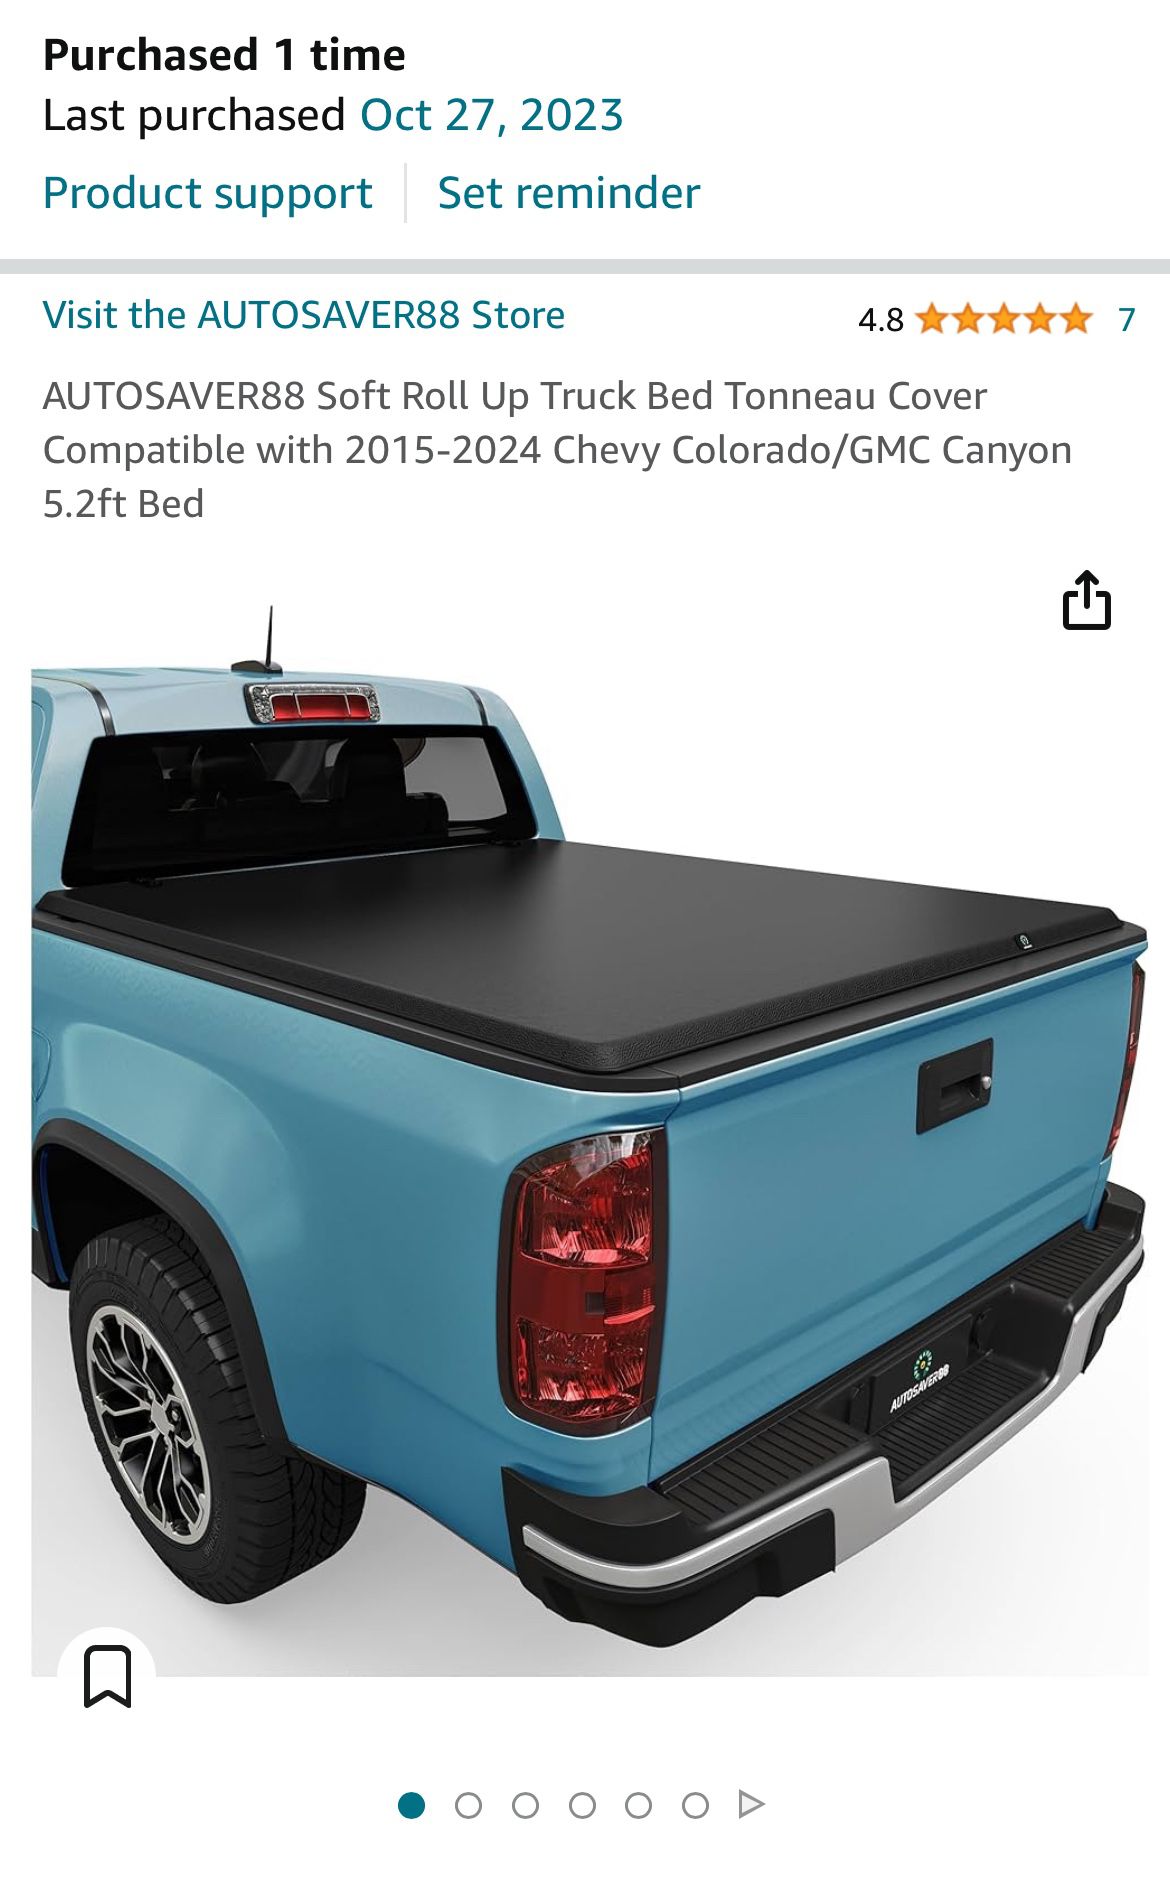 Soft Roll Up Truck Bed Tonneau Cover Compatible with 2015-2024 Chevy Colorado/GMC Canyon 5.2ft Bed